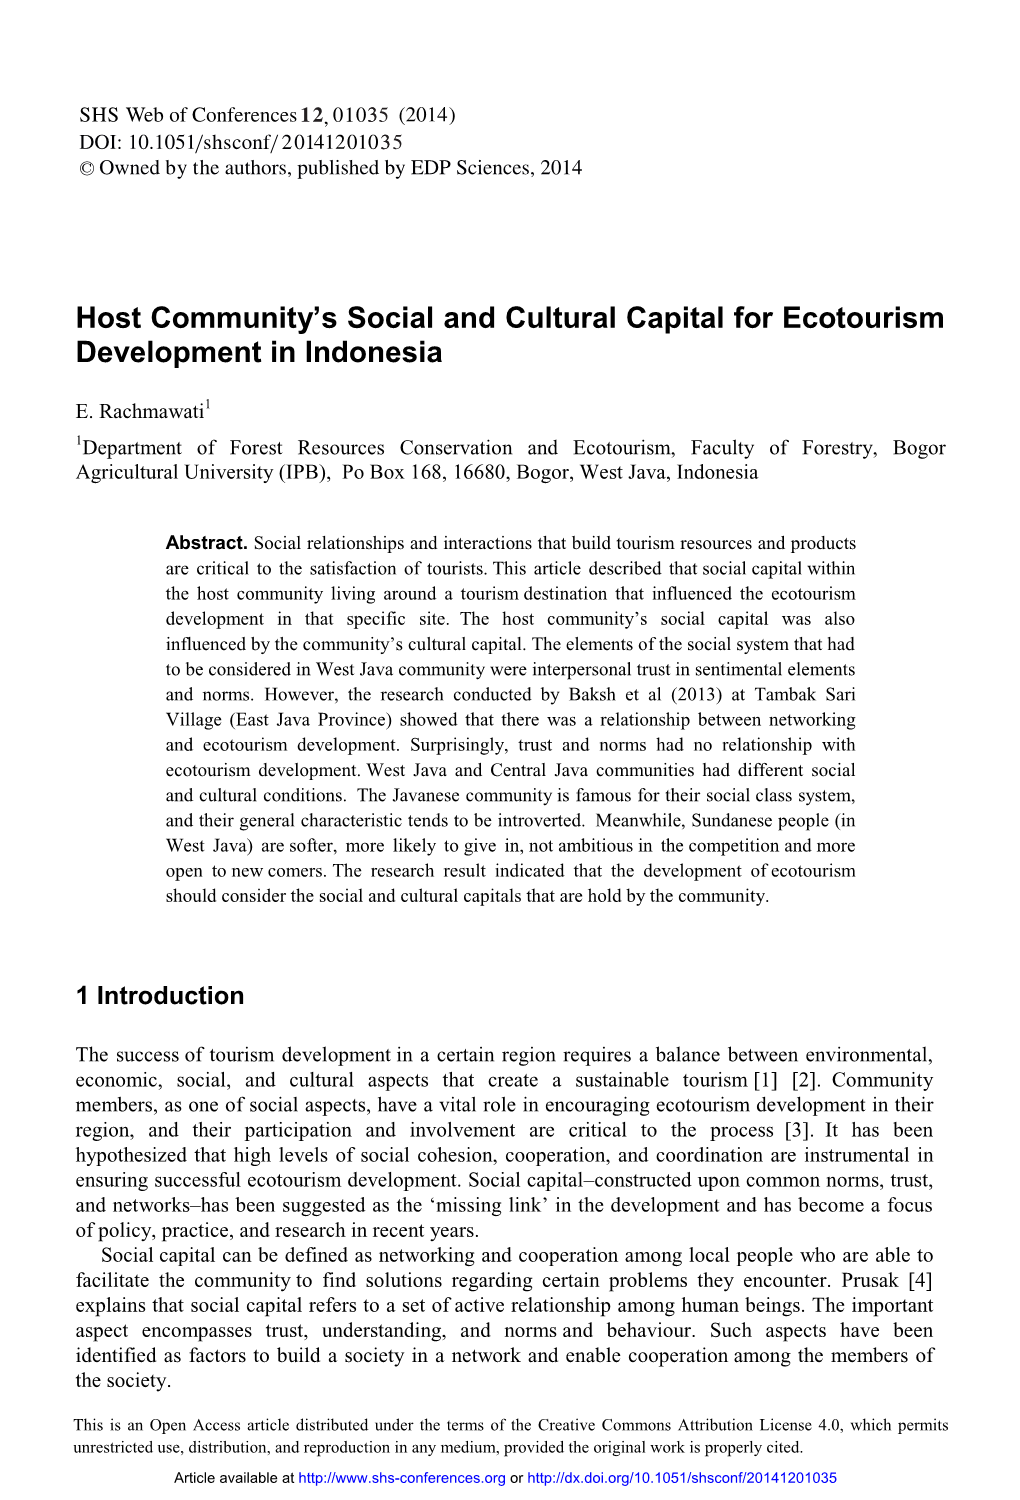 Host Community's Social and Cultural Capital for Ecotourism